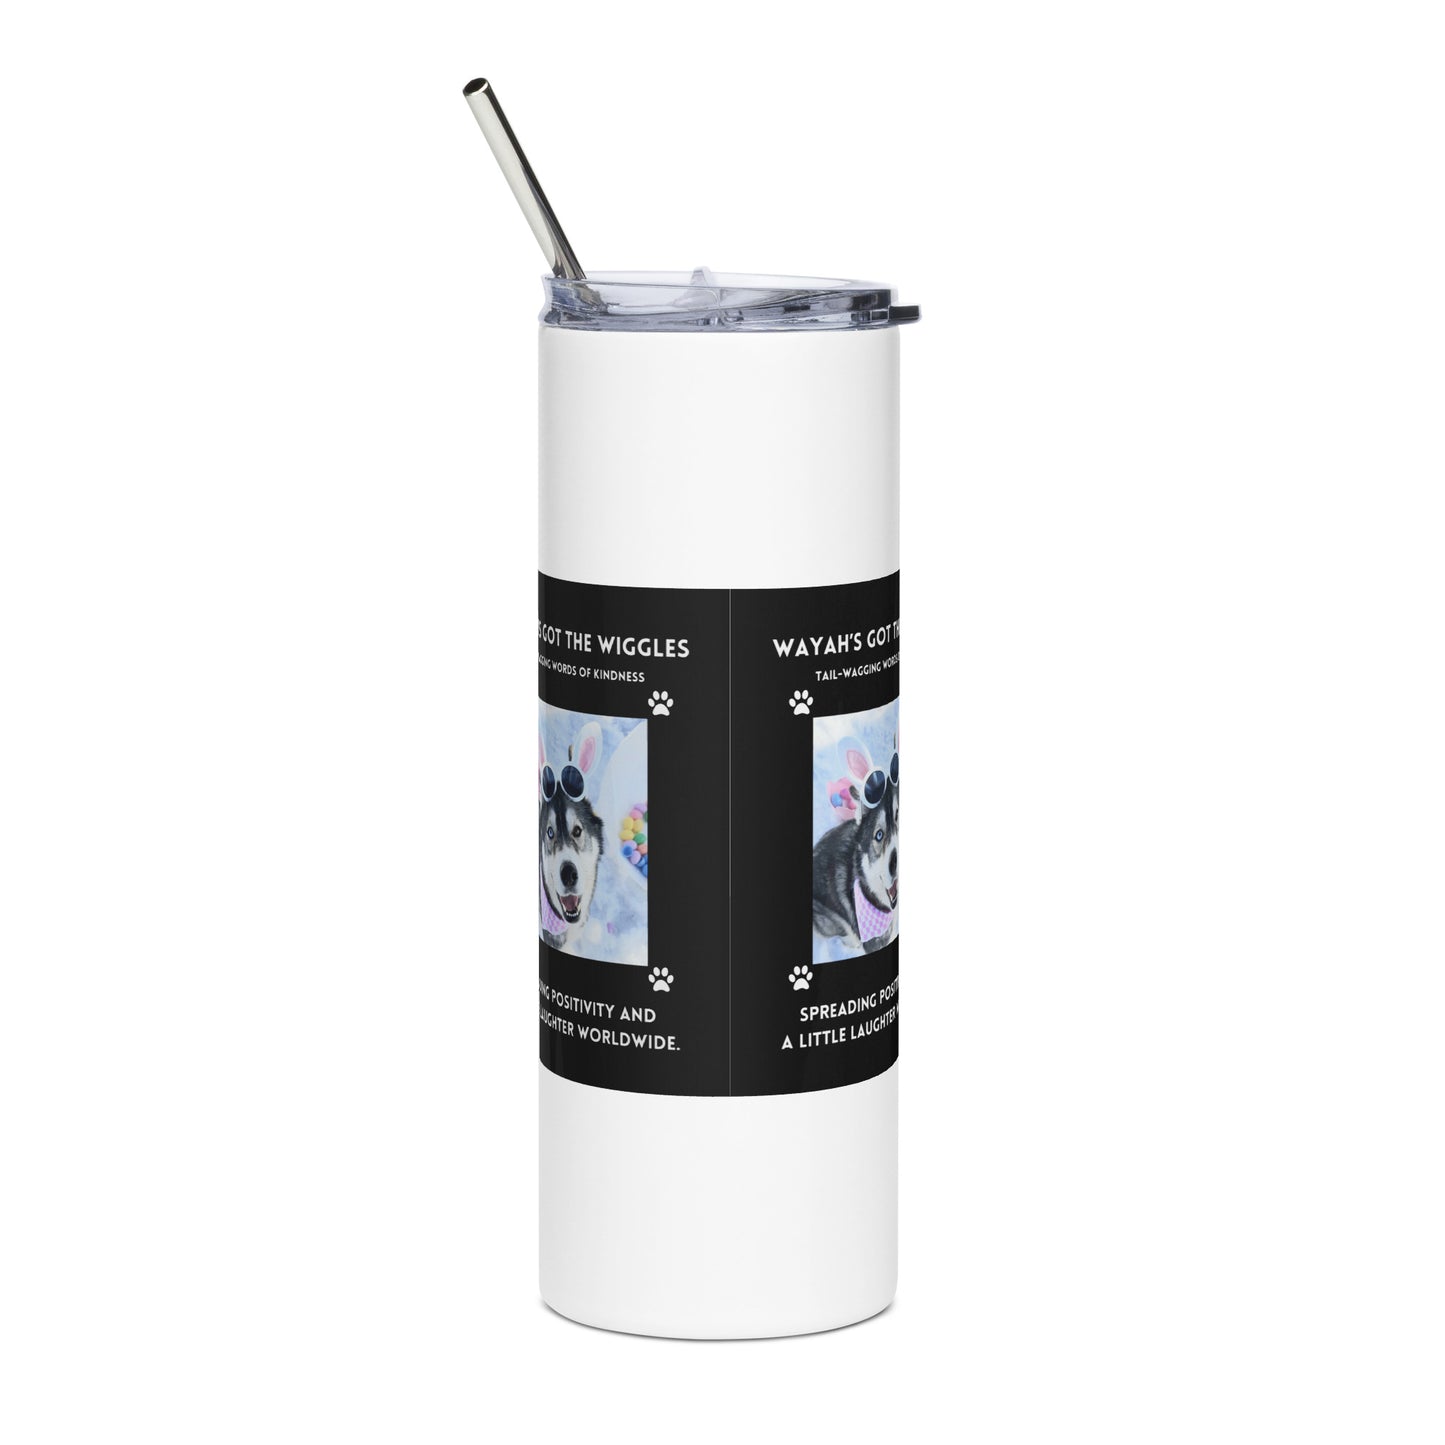 Stainless steel tumbler- Wayah's Got the Wiggles